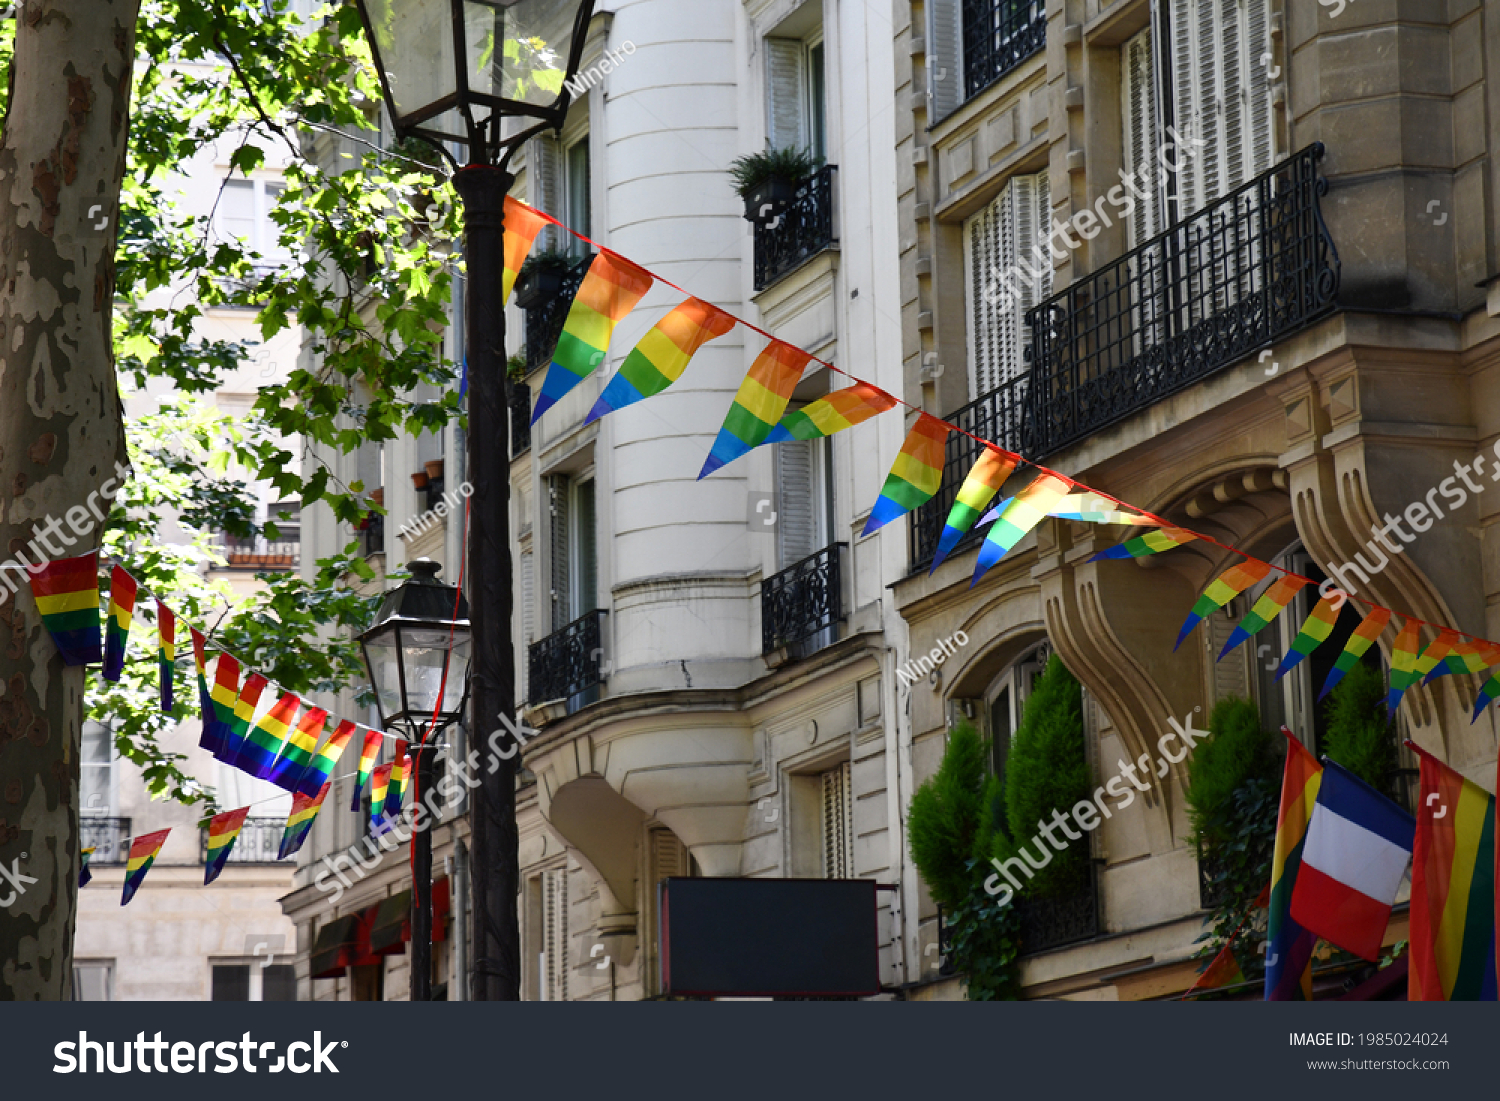 Decoration of triangle shape banners in colors of Lgbtq flags hanging between vintage lantern streetlights and ornate house with balconies. Gay pride parade symbols and French flag in Paris, France #1985024024